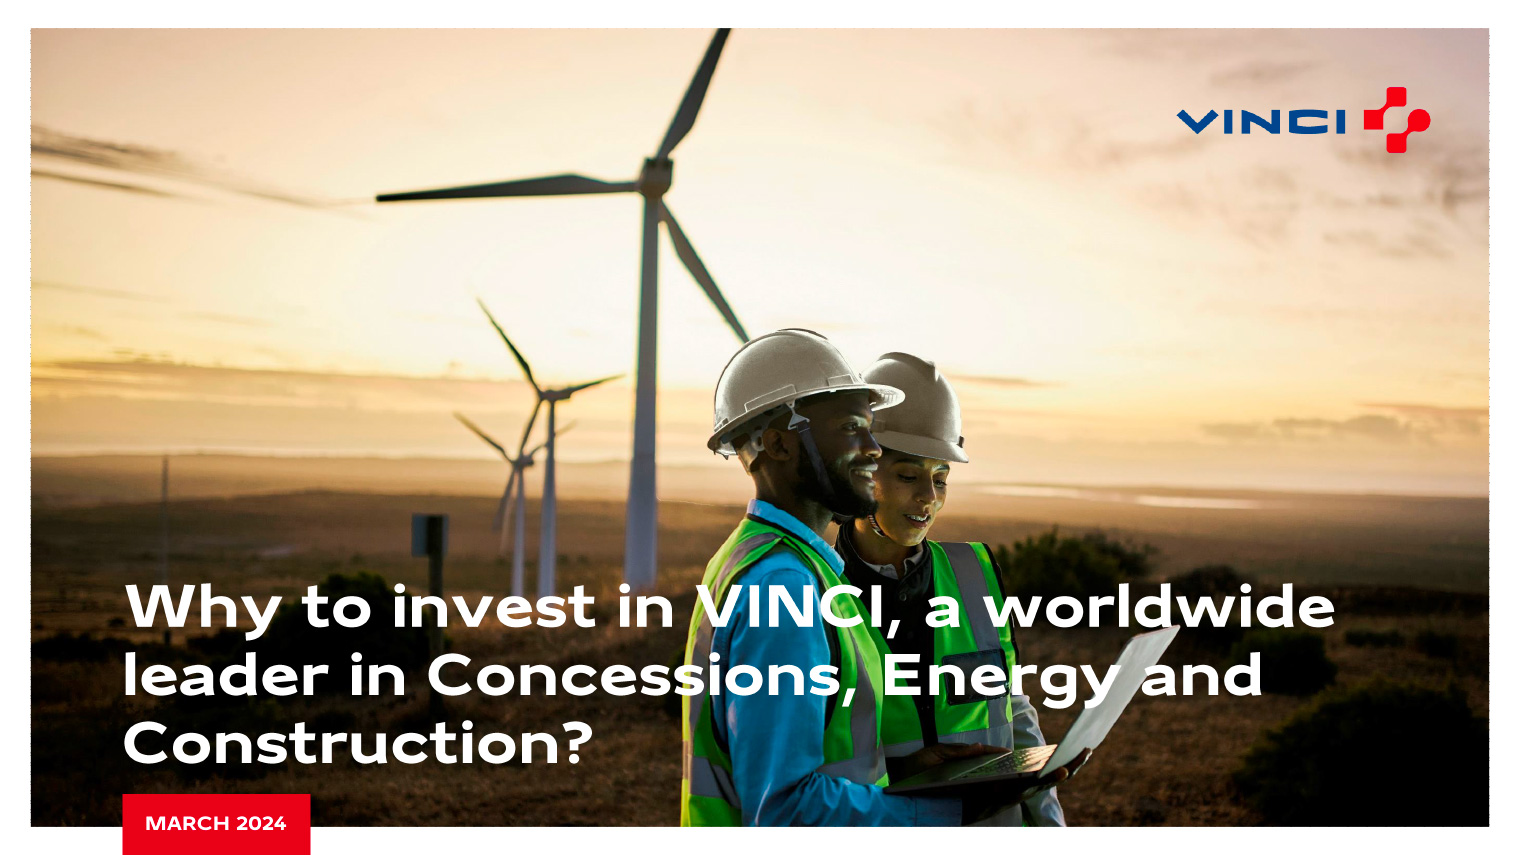 Why to invest in VINCI?